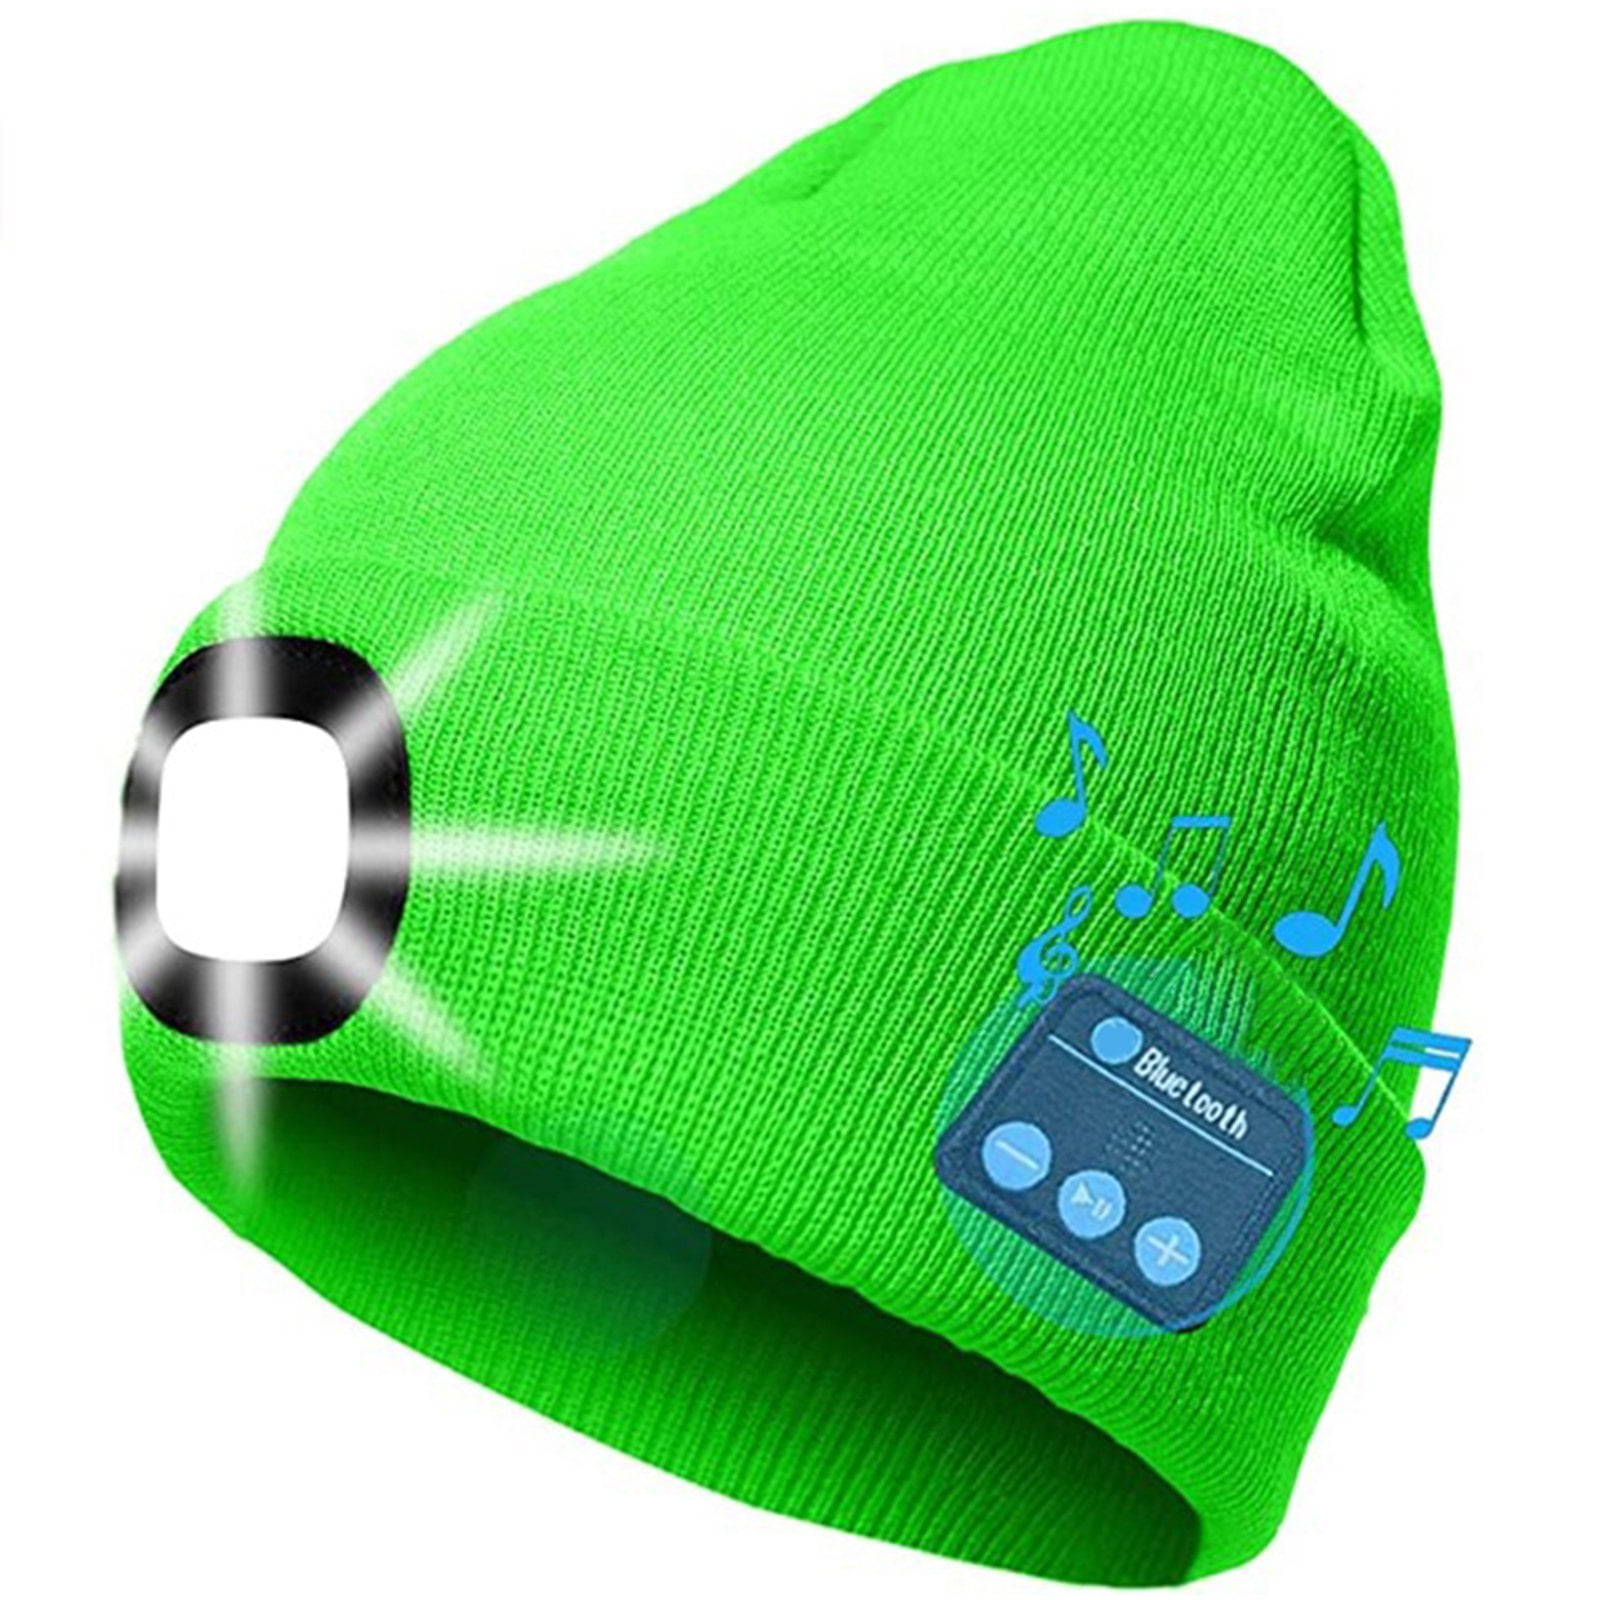 Morttic Bluetooth Beanie Hat, LED Lighted Hat with Built-in Stereo Speakers   Mic,Unisex USB Rechargeable Headset Knitted Cap for  Outdoor,Sports,Camping,Hiking,Walking